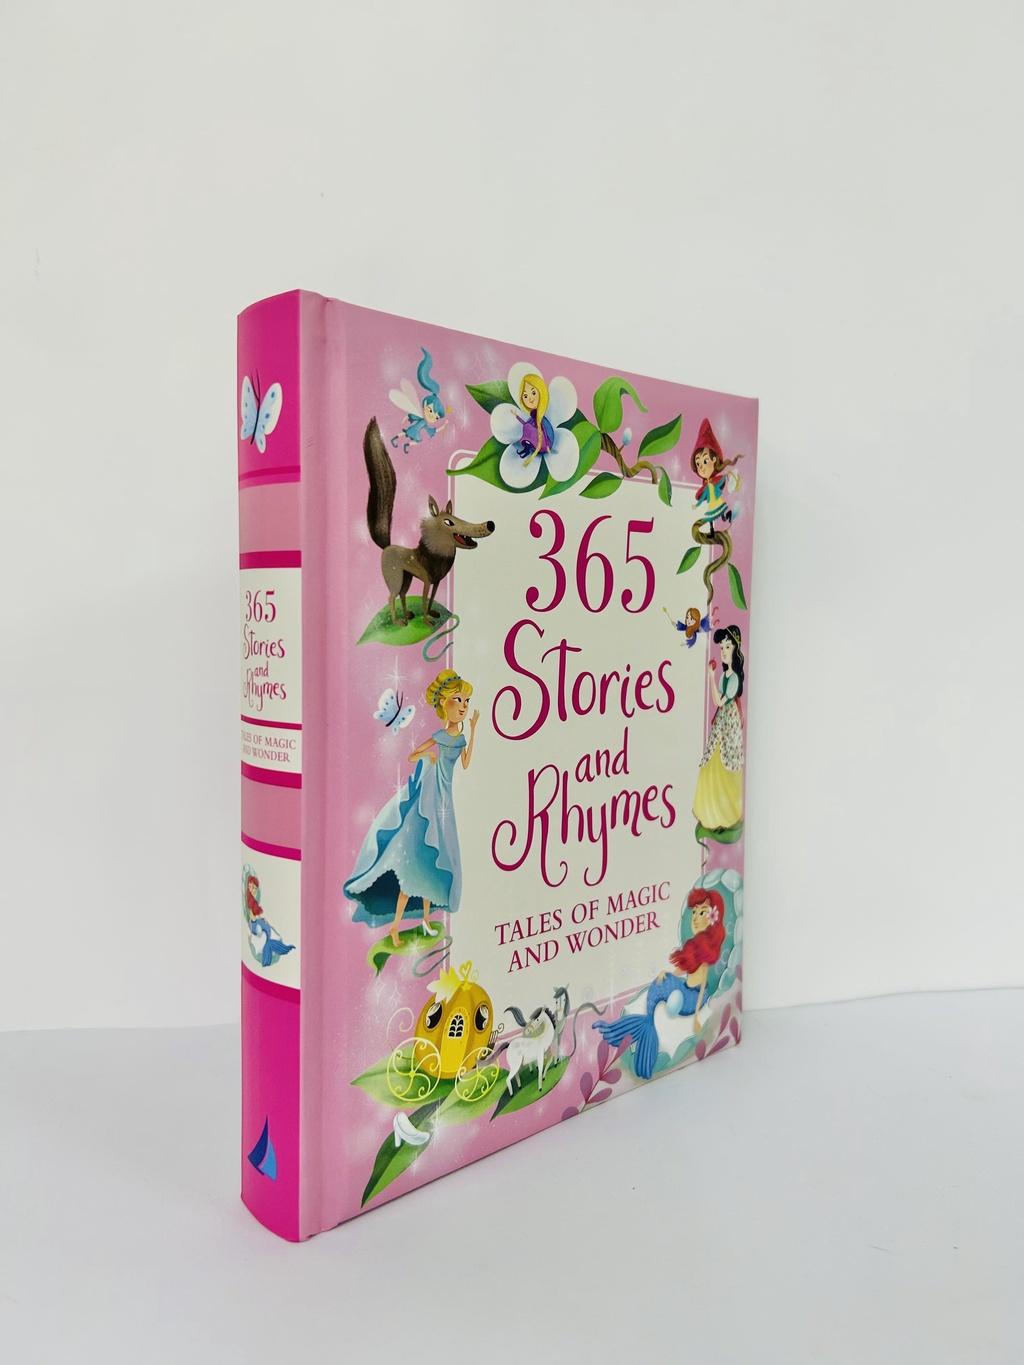 365 Stories And Rhymes: Tales Of Magic And Wonder